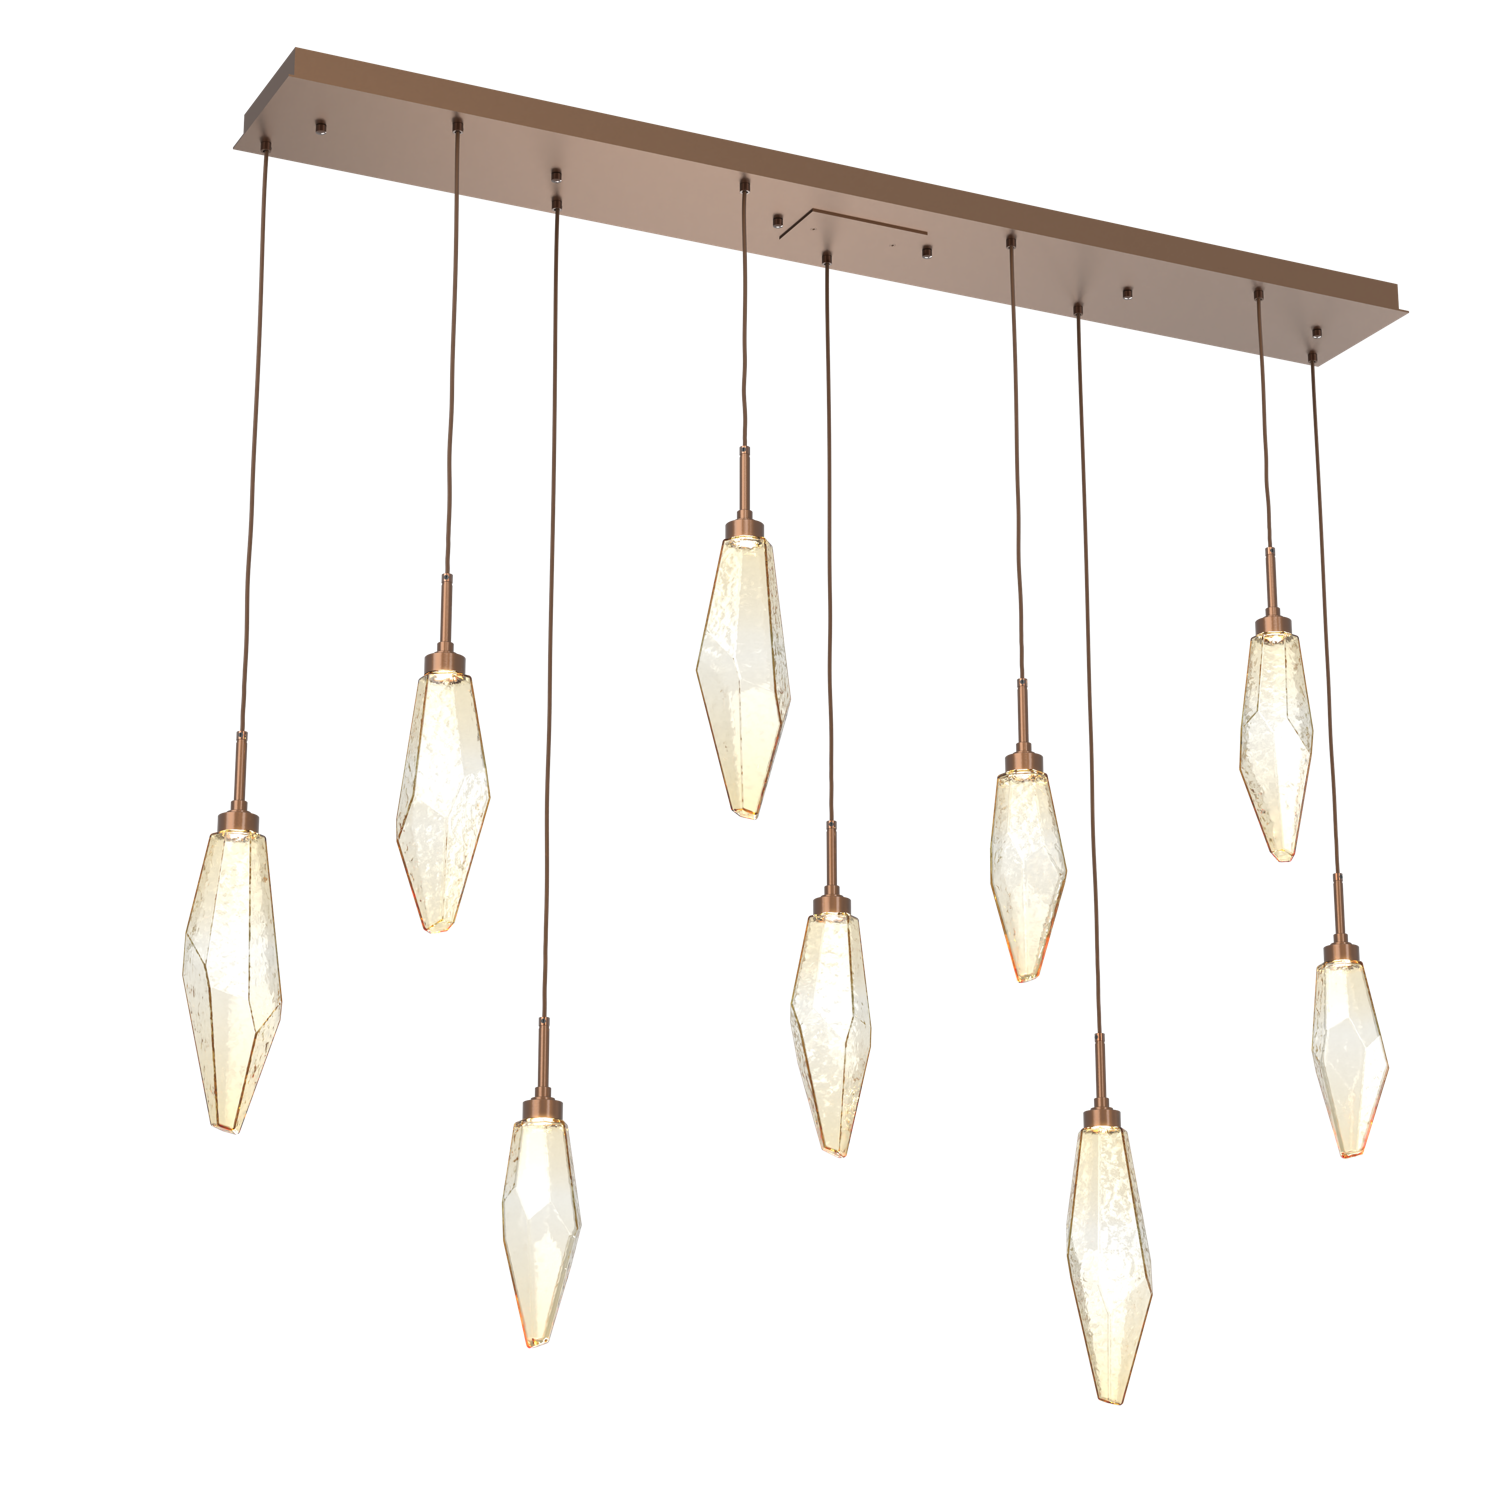 PLB0050-09-BB-CA-Hammerton-Studio-Rock-Crystal-9-light-linear-pendant-chandelier-with-burnished-bronze-finish-and-chilled-amber-blown-glass-shades-and-LED-lamping